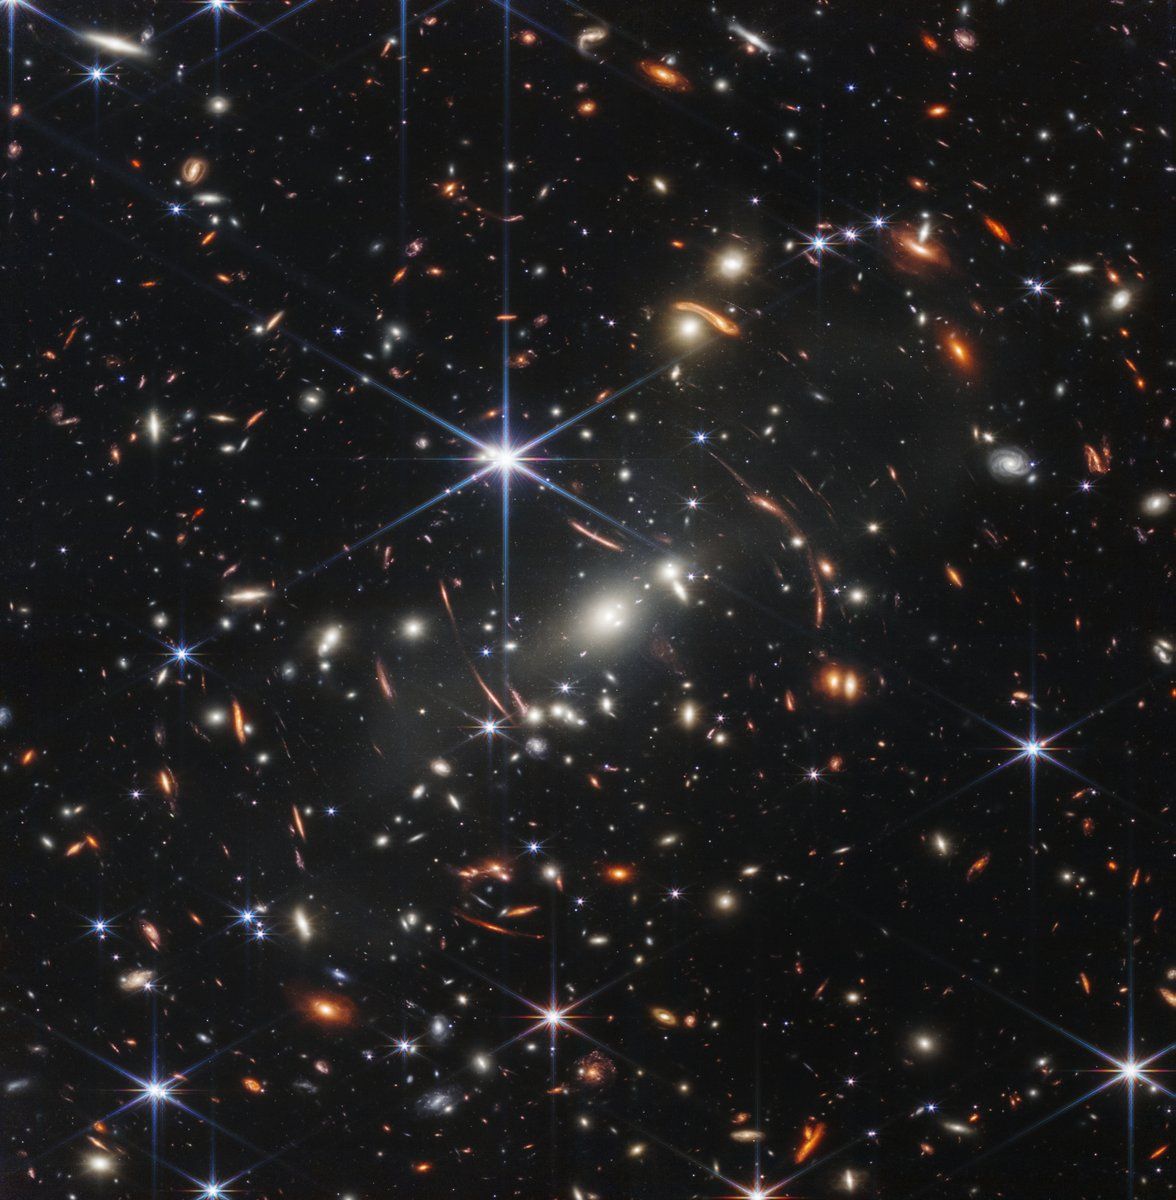 NASA shares deepest and sharpest image of the early universe ever taken